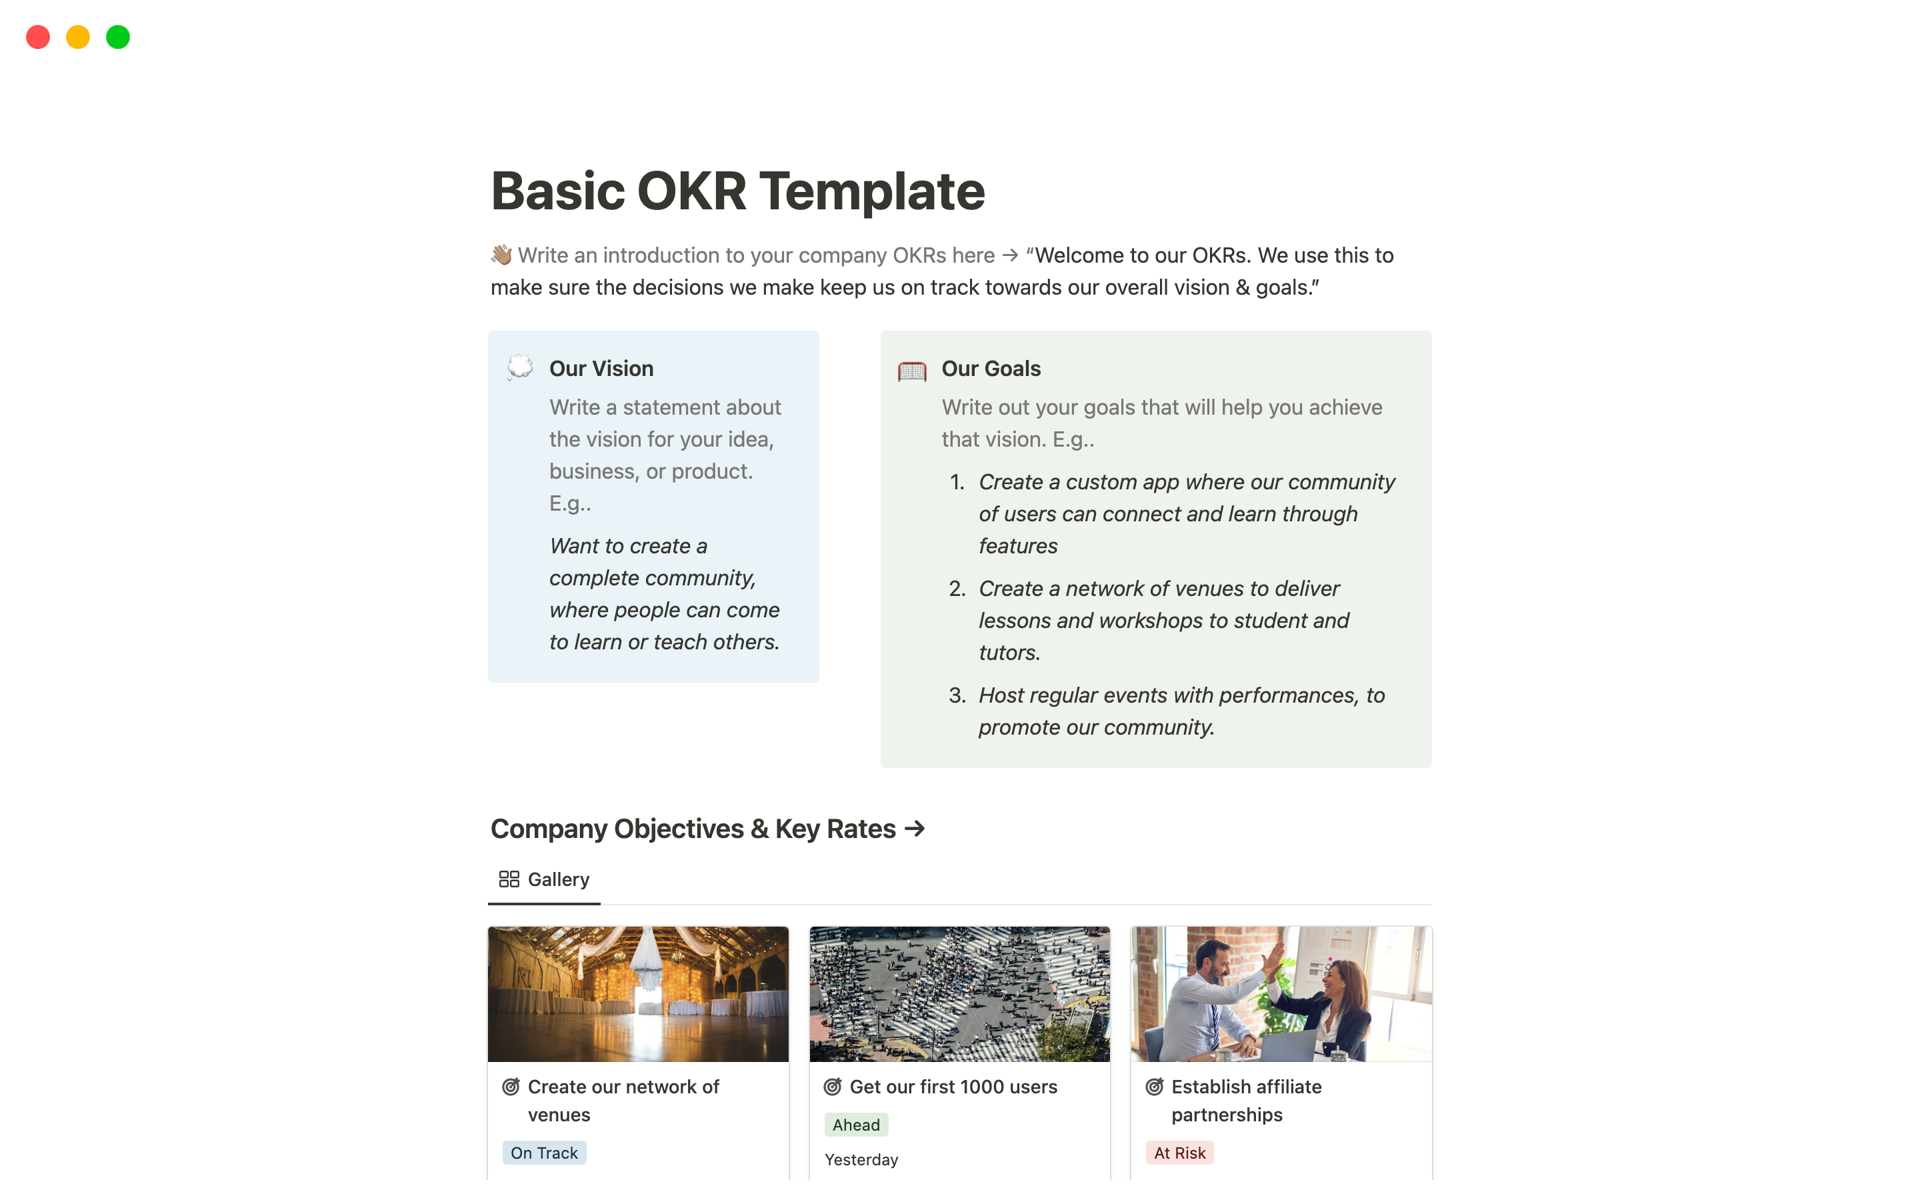 A template preview for Basic OKR